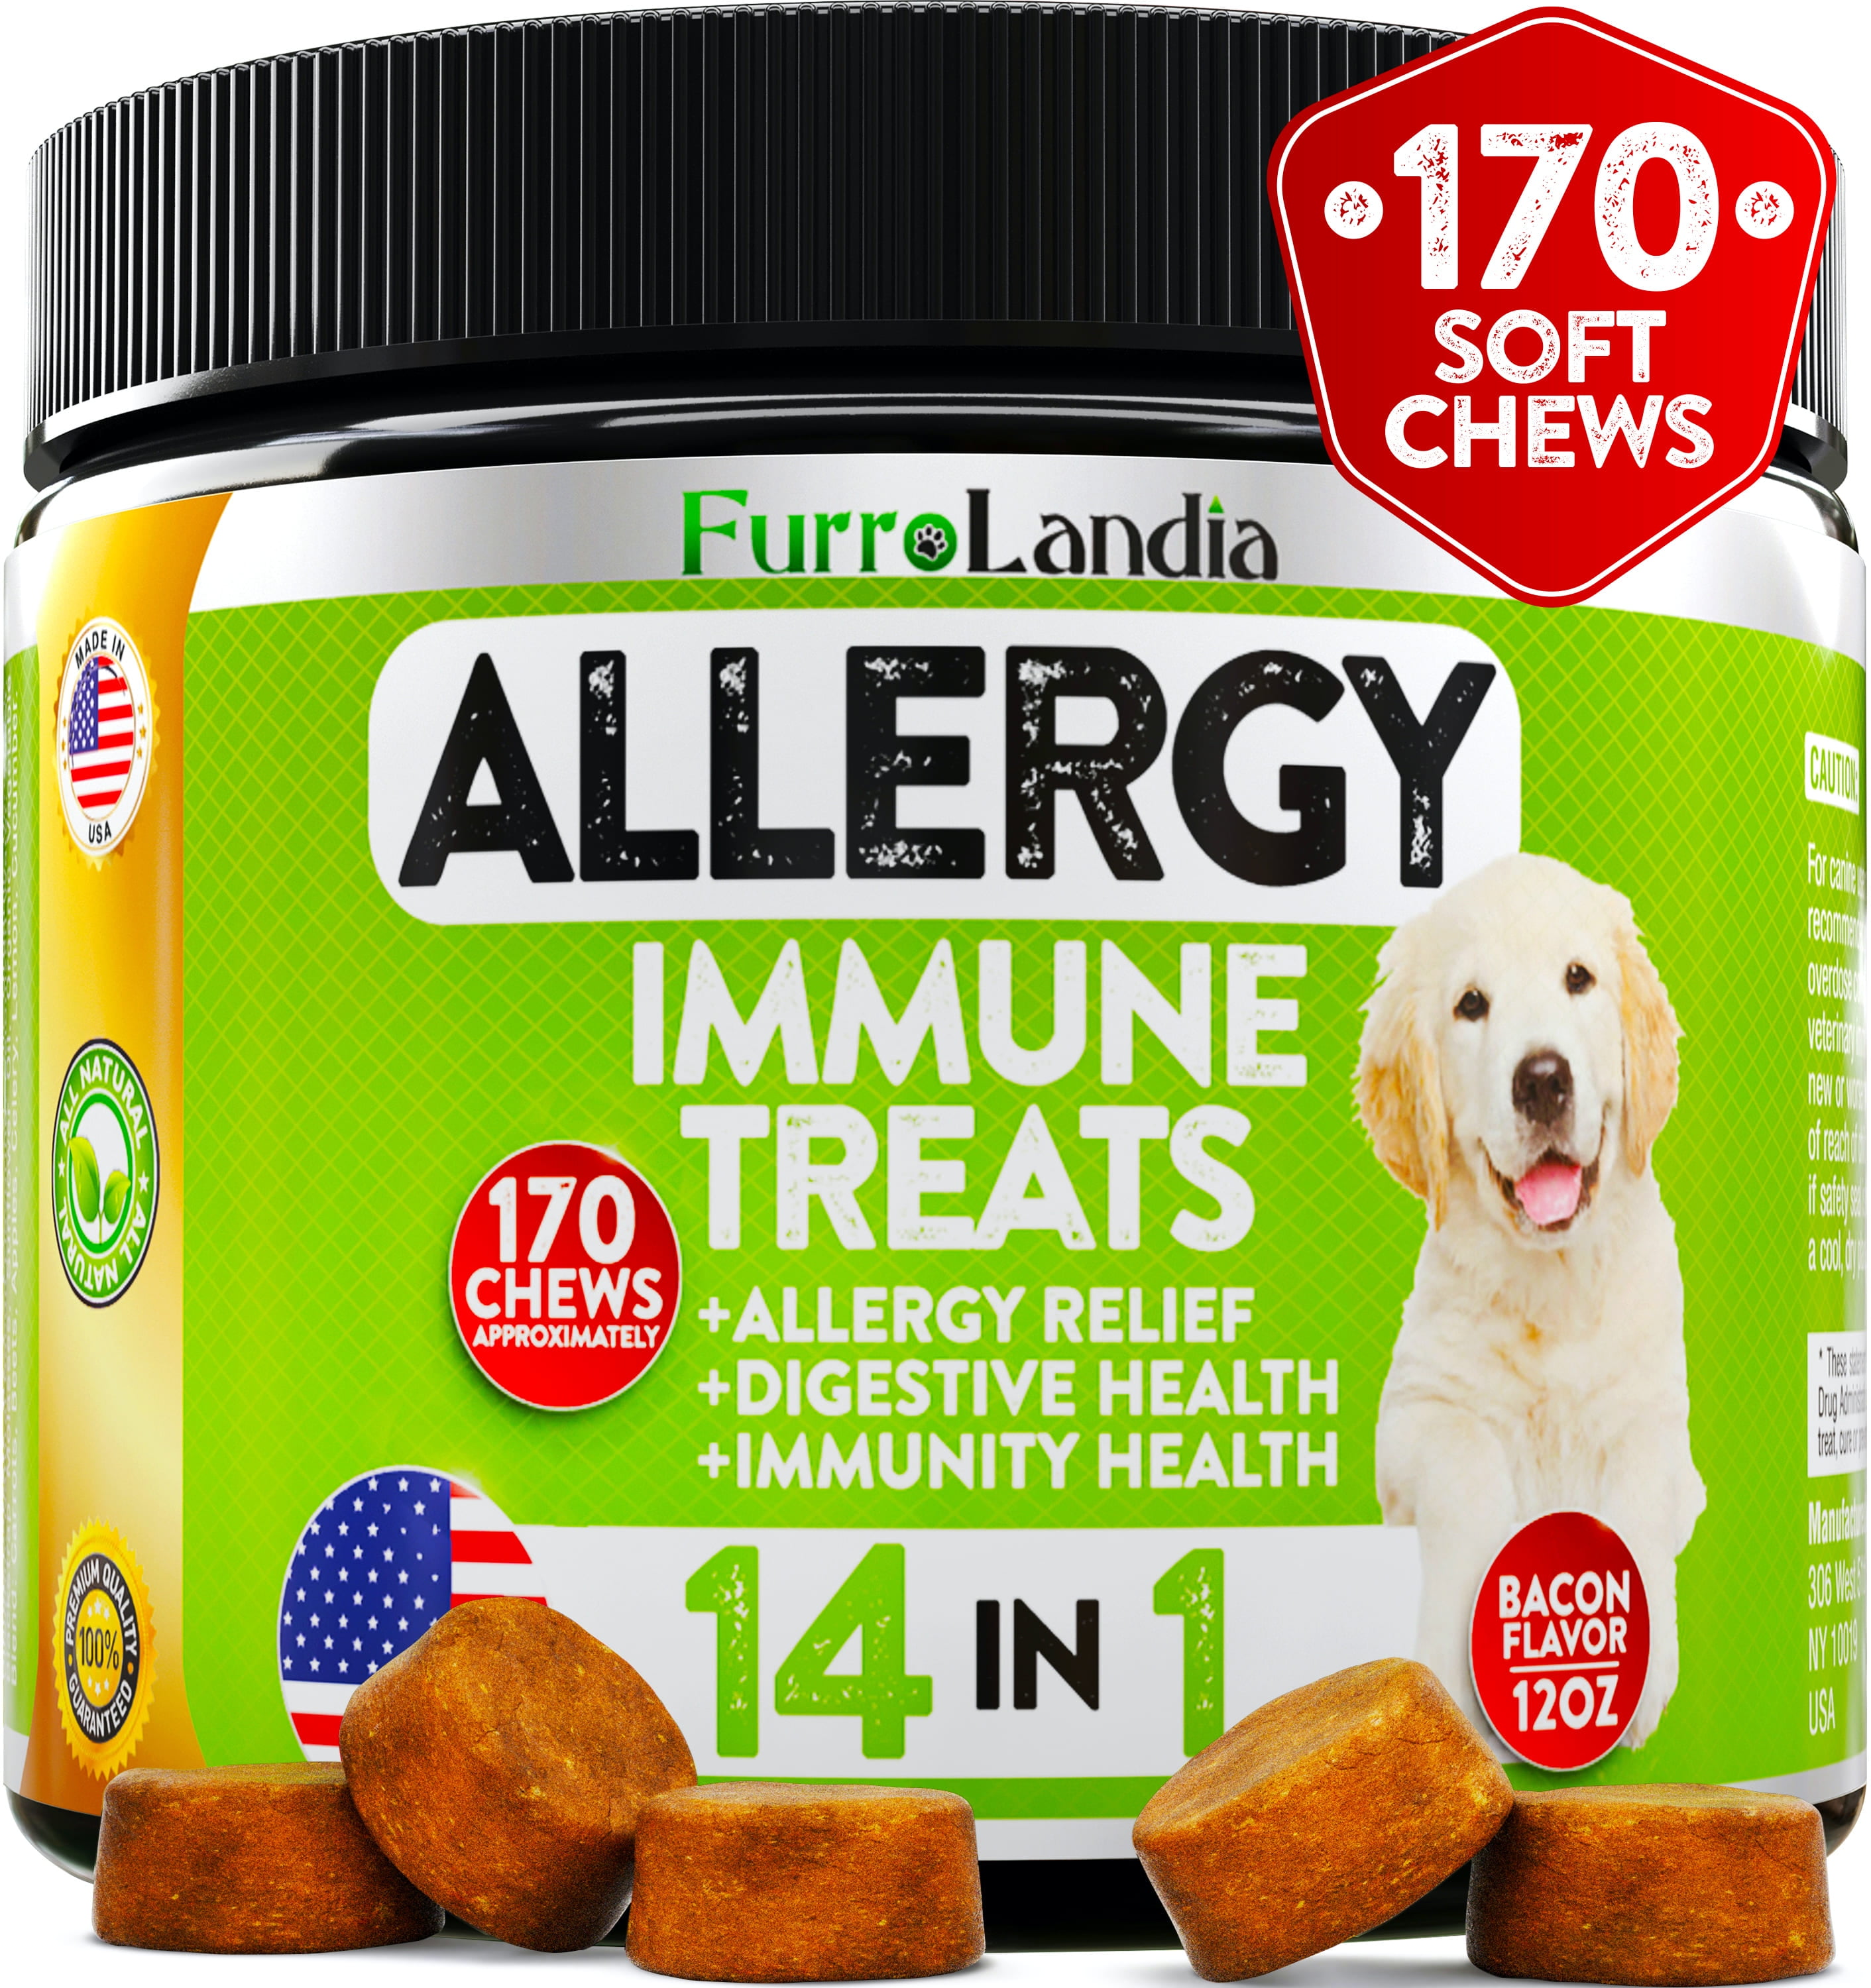 Relieve Dog Allergies | lupon.gov.ph